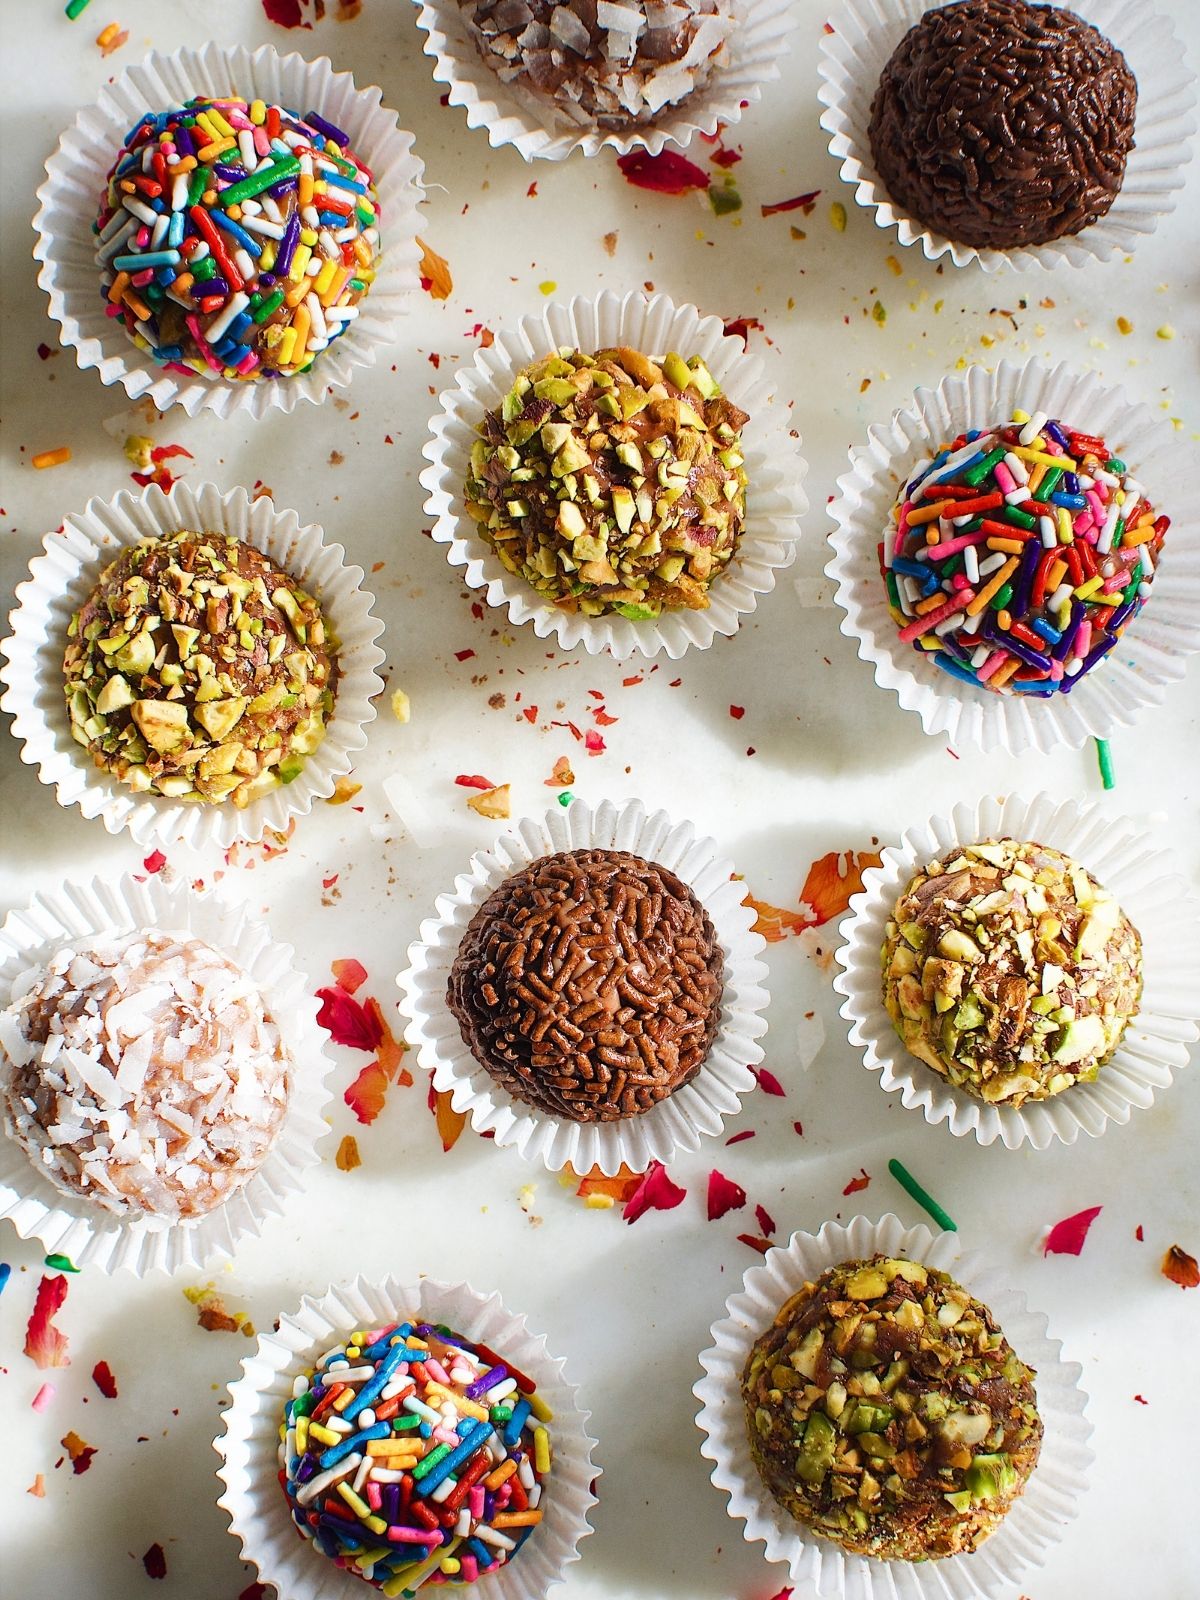 brigadeiro balls, coated with chocolate sprinkles, chopped nuts, assorted sprinkles, and coconut flakes, in a mini cupcake liners.